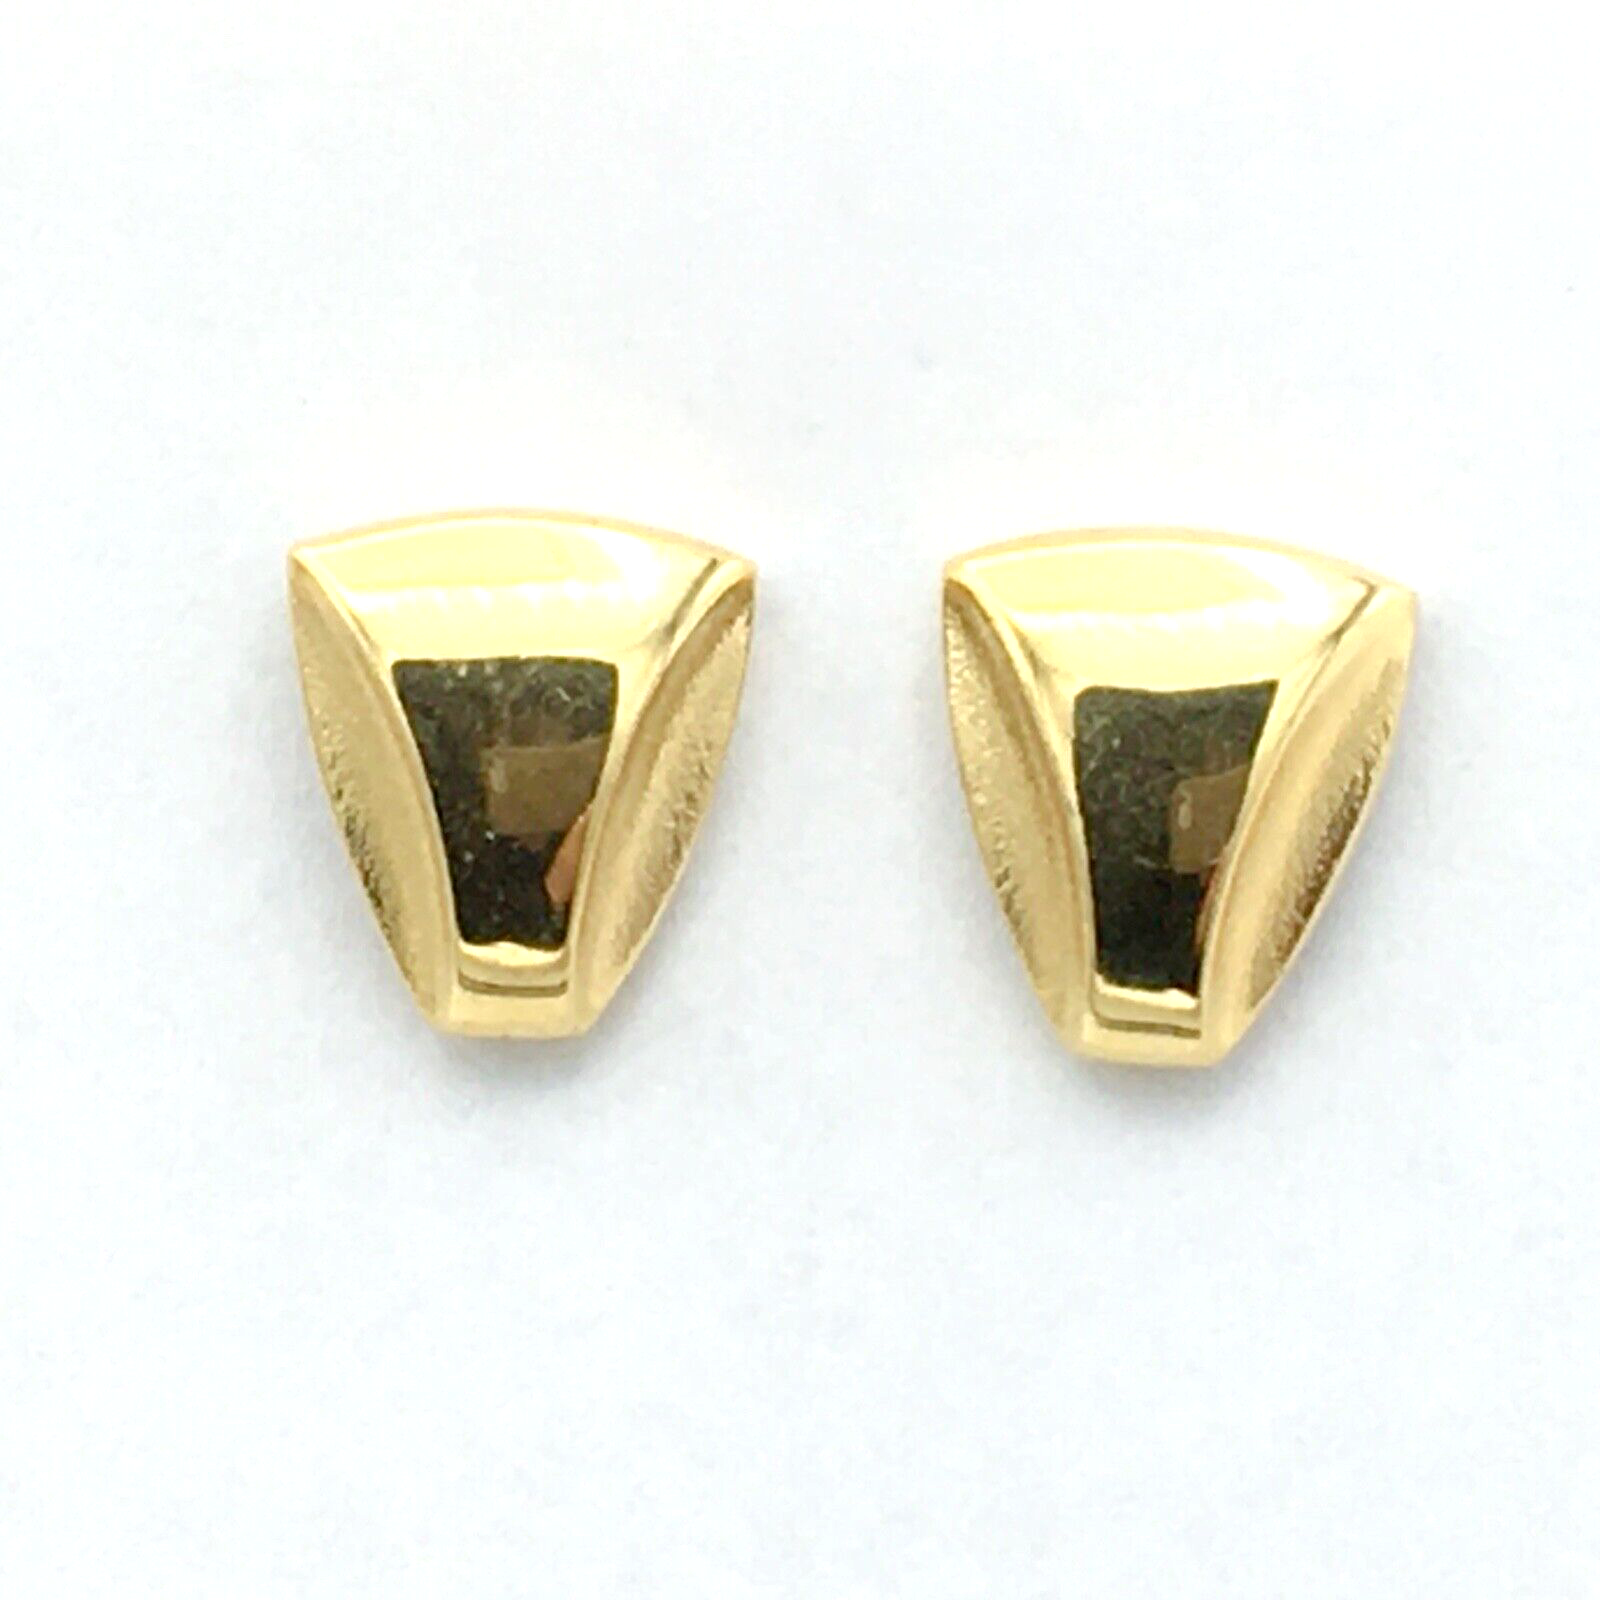 Primary image for MONET vintage triangular stud earrings - gold-tone textured signed pierced 5/8"